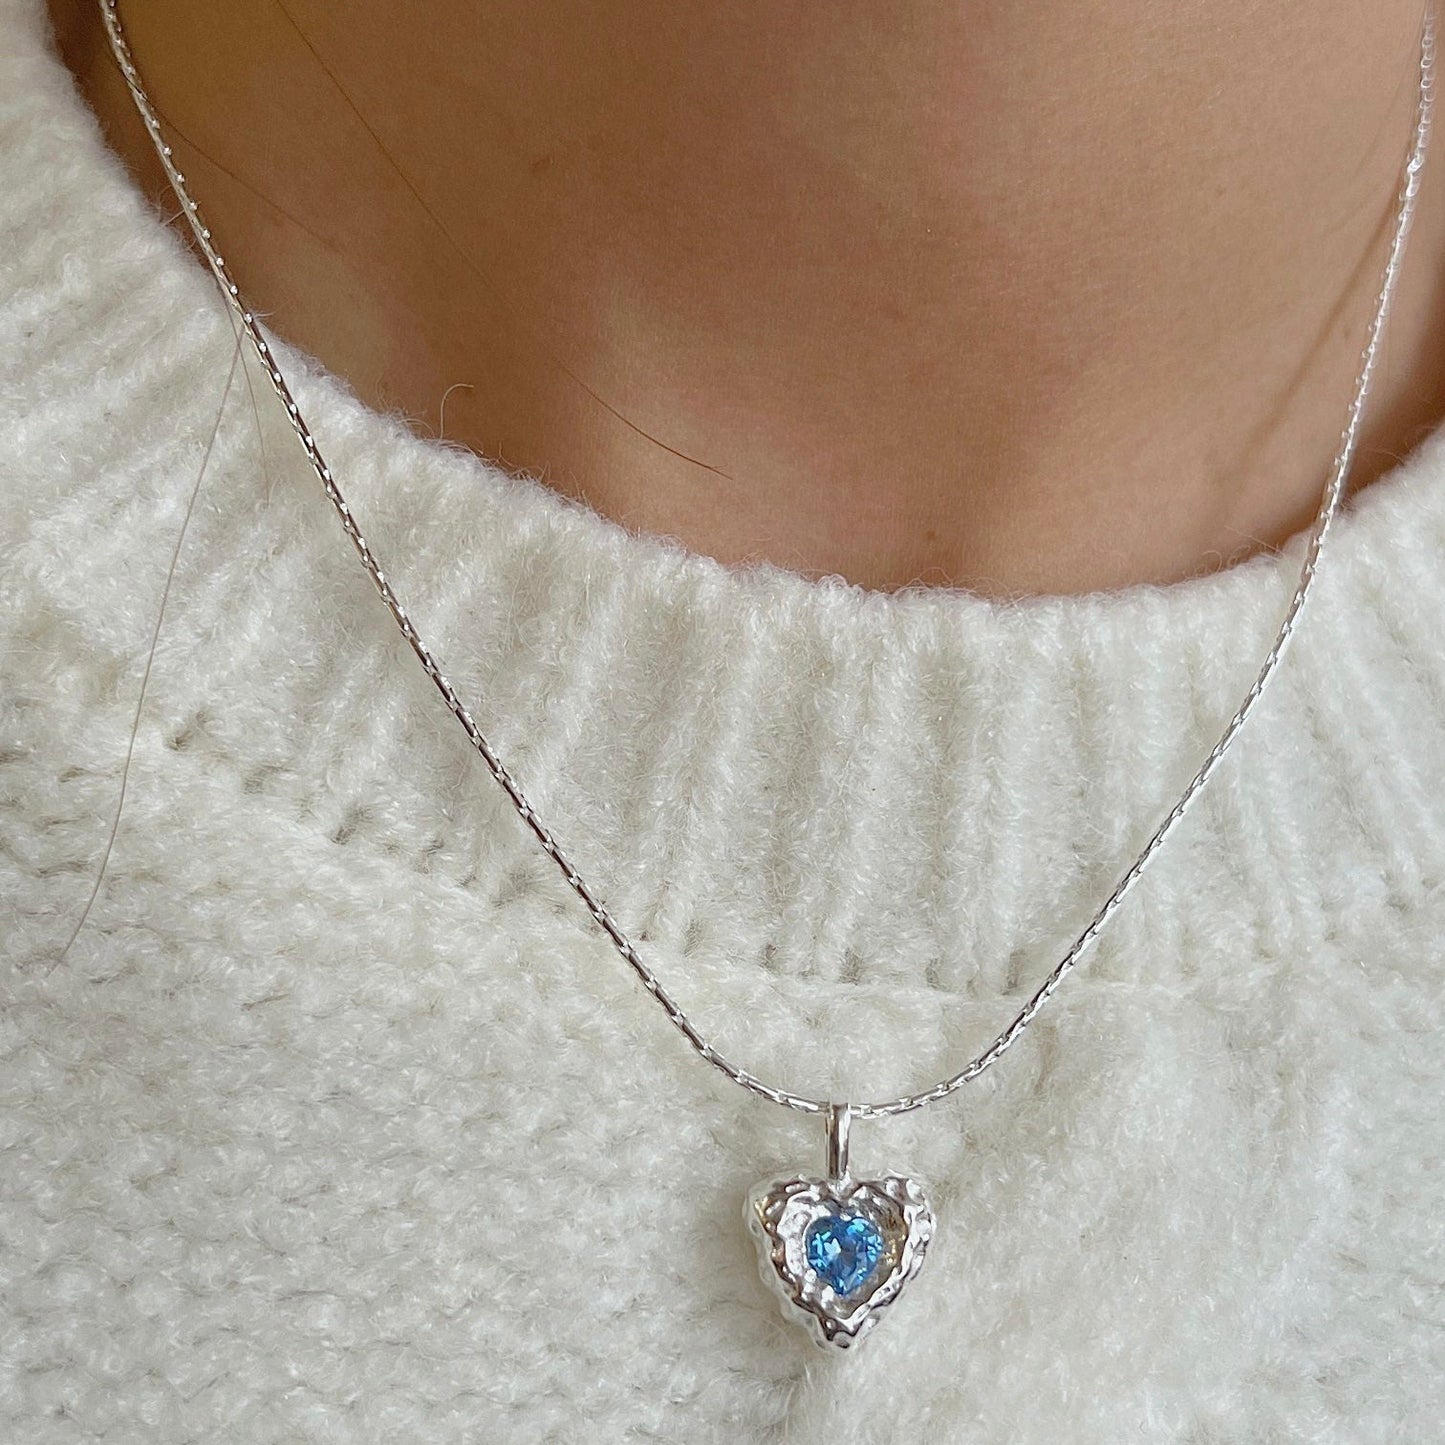 Blue Topaz Gemstone S925 Sterling Silver Pendant Necklace - neverland accessories